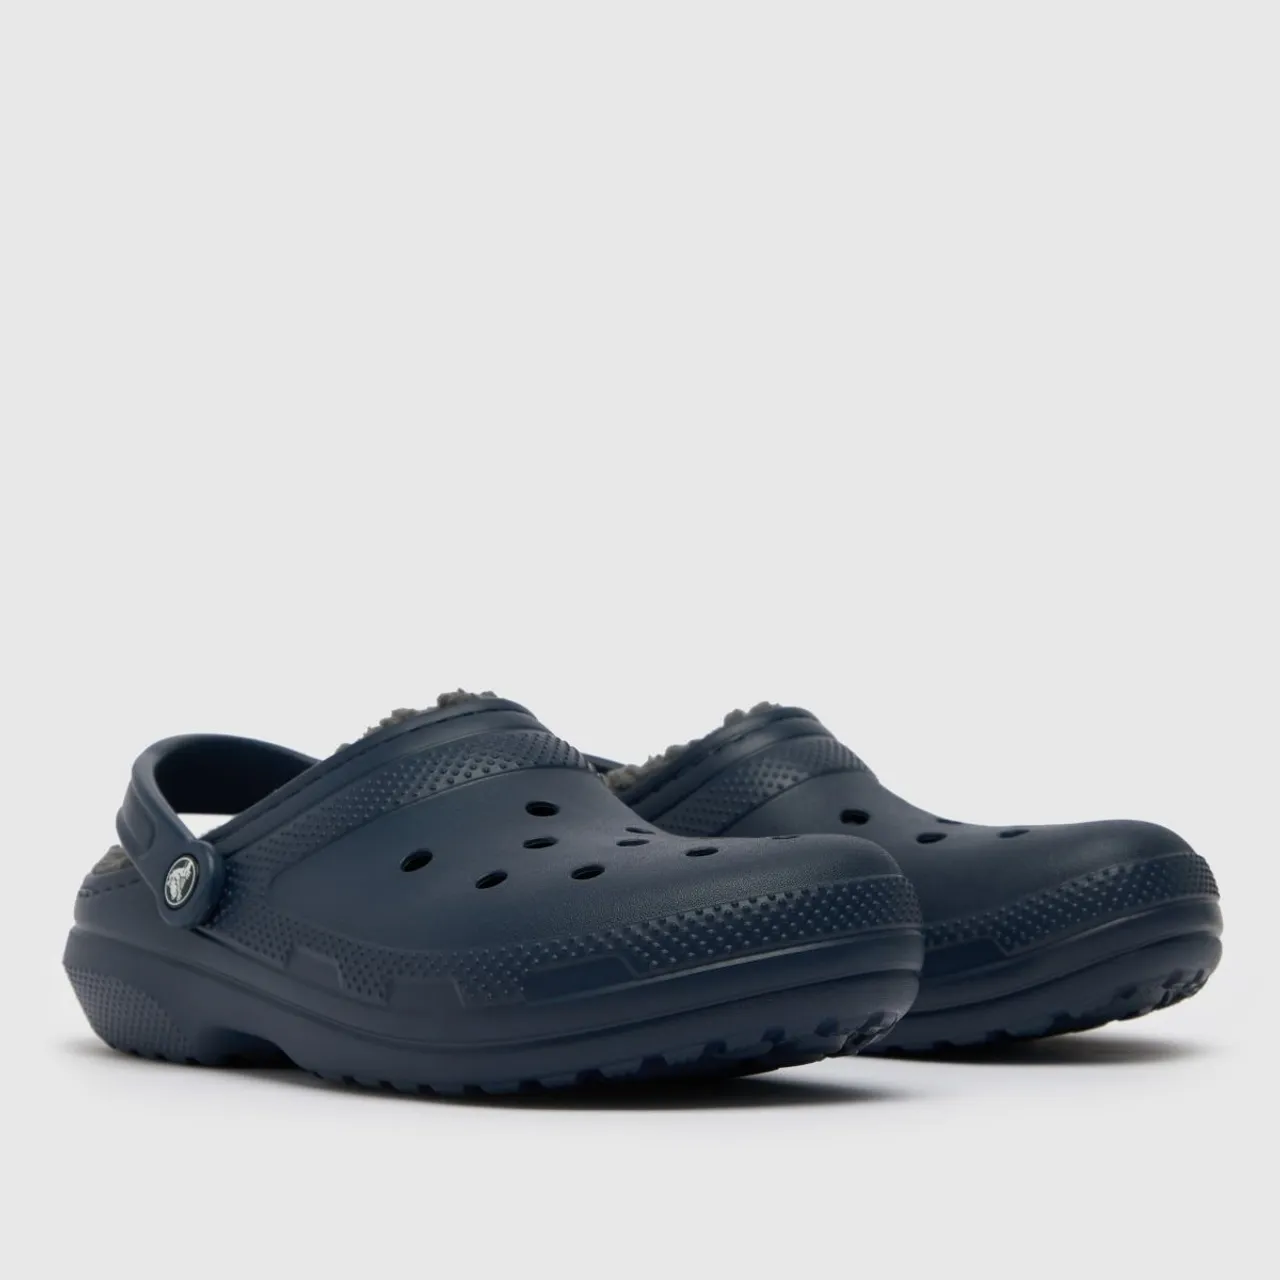 Crocs Classic Lined Clog Sandals In Navy